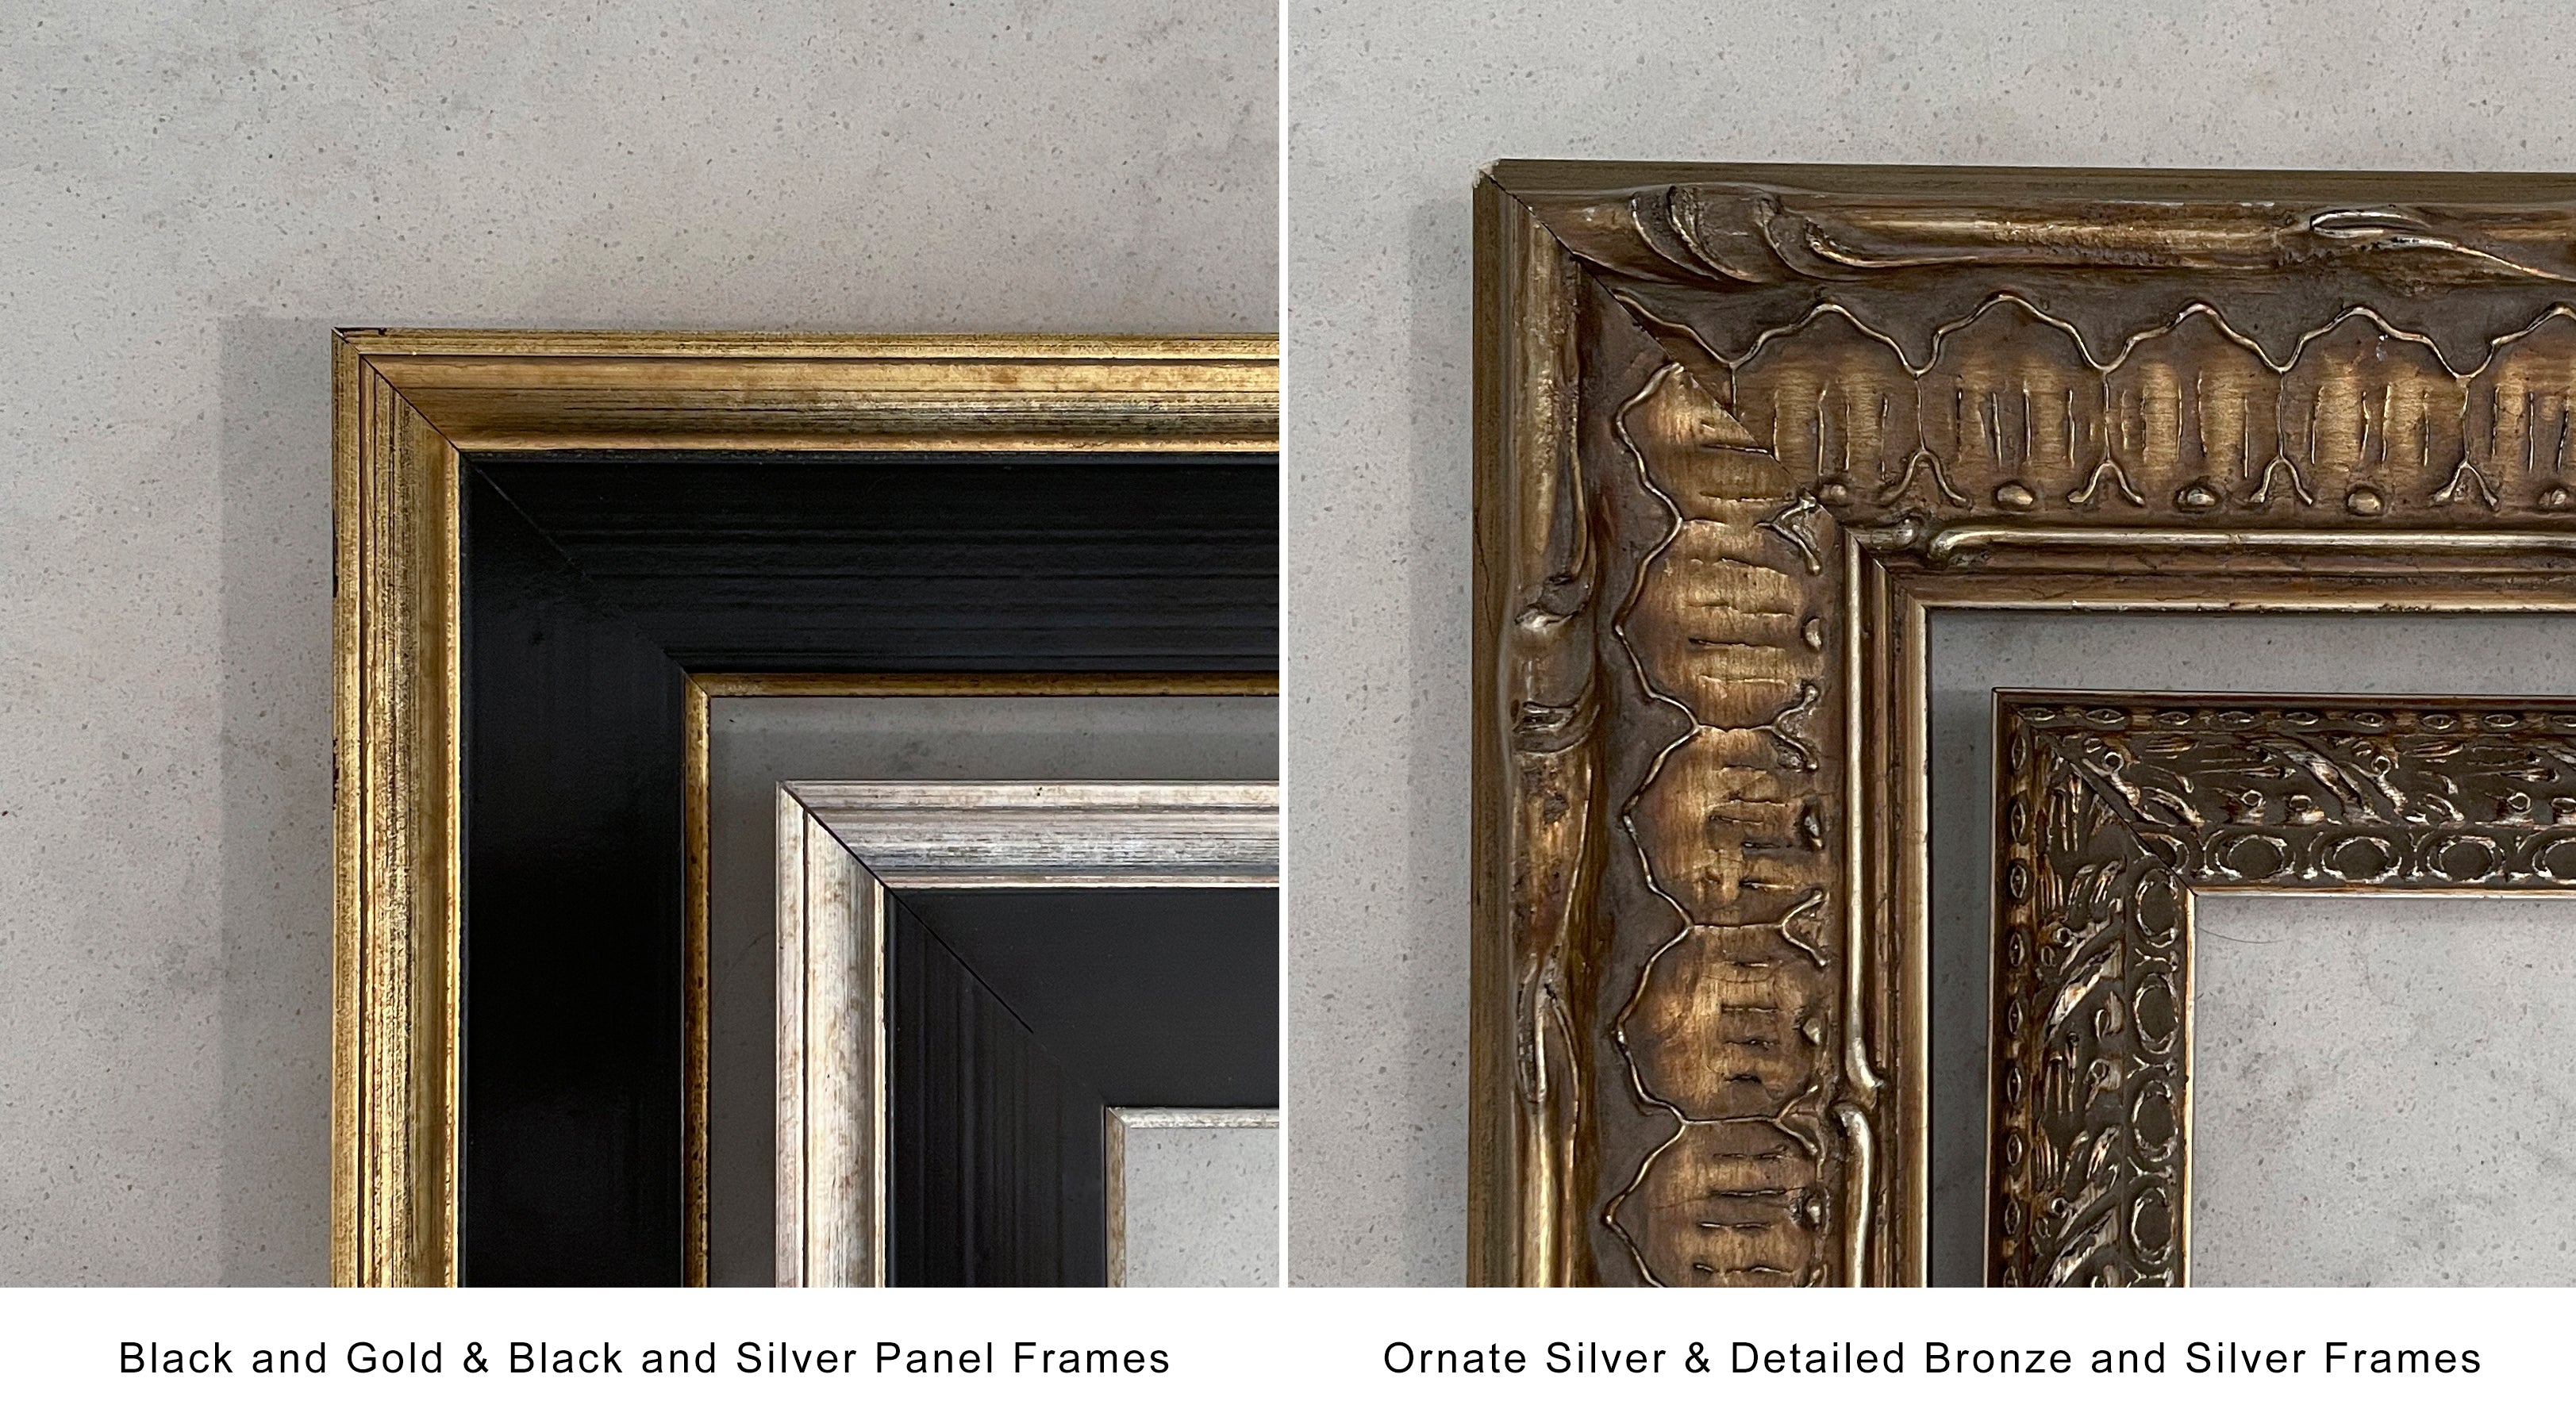 Black and Gold Panel and Black and Silver Panel Frames